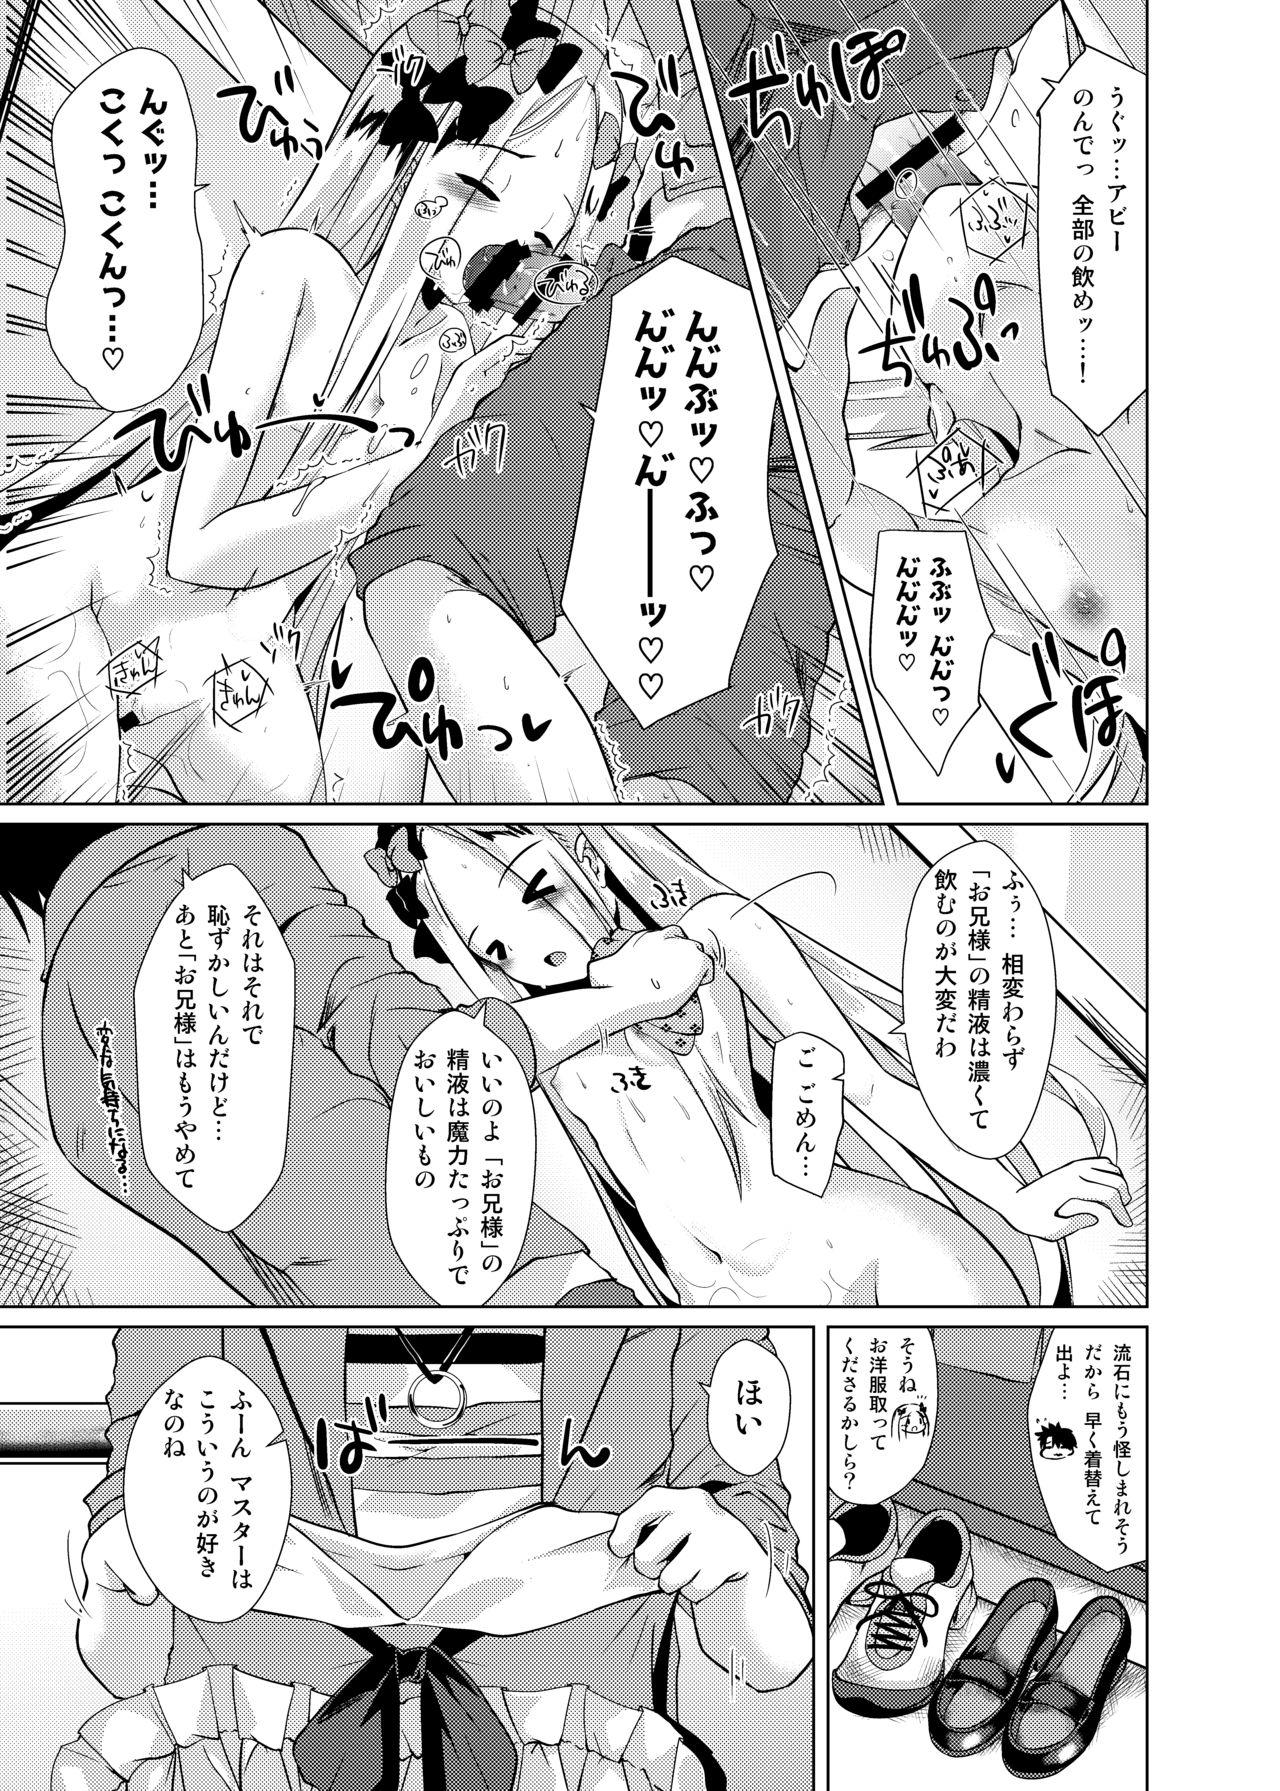 Masturbacion Chaldea Outdoor Challenge Abby-chan to Issho 3 - Fate grand order Transgender - Page 8